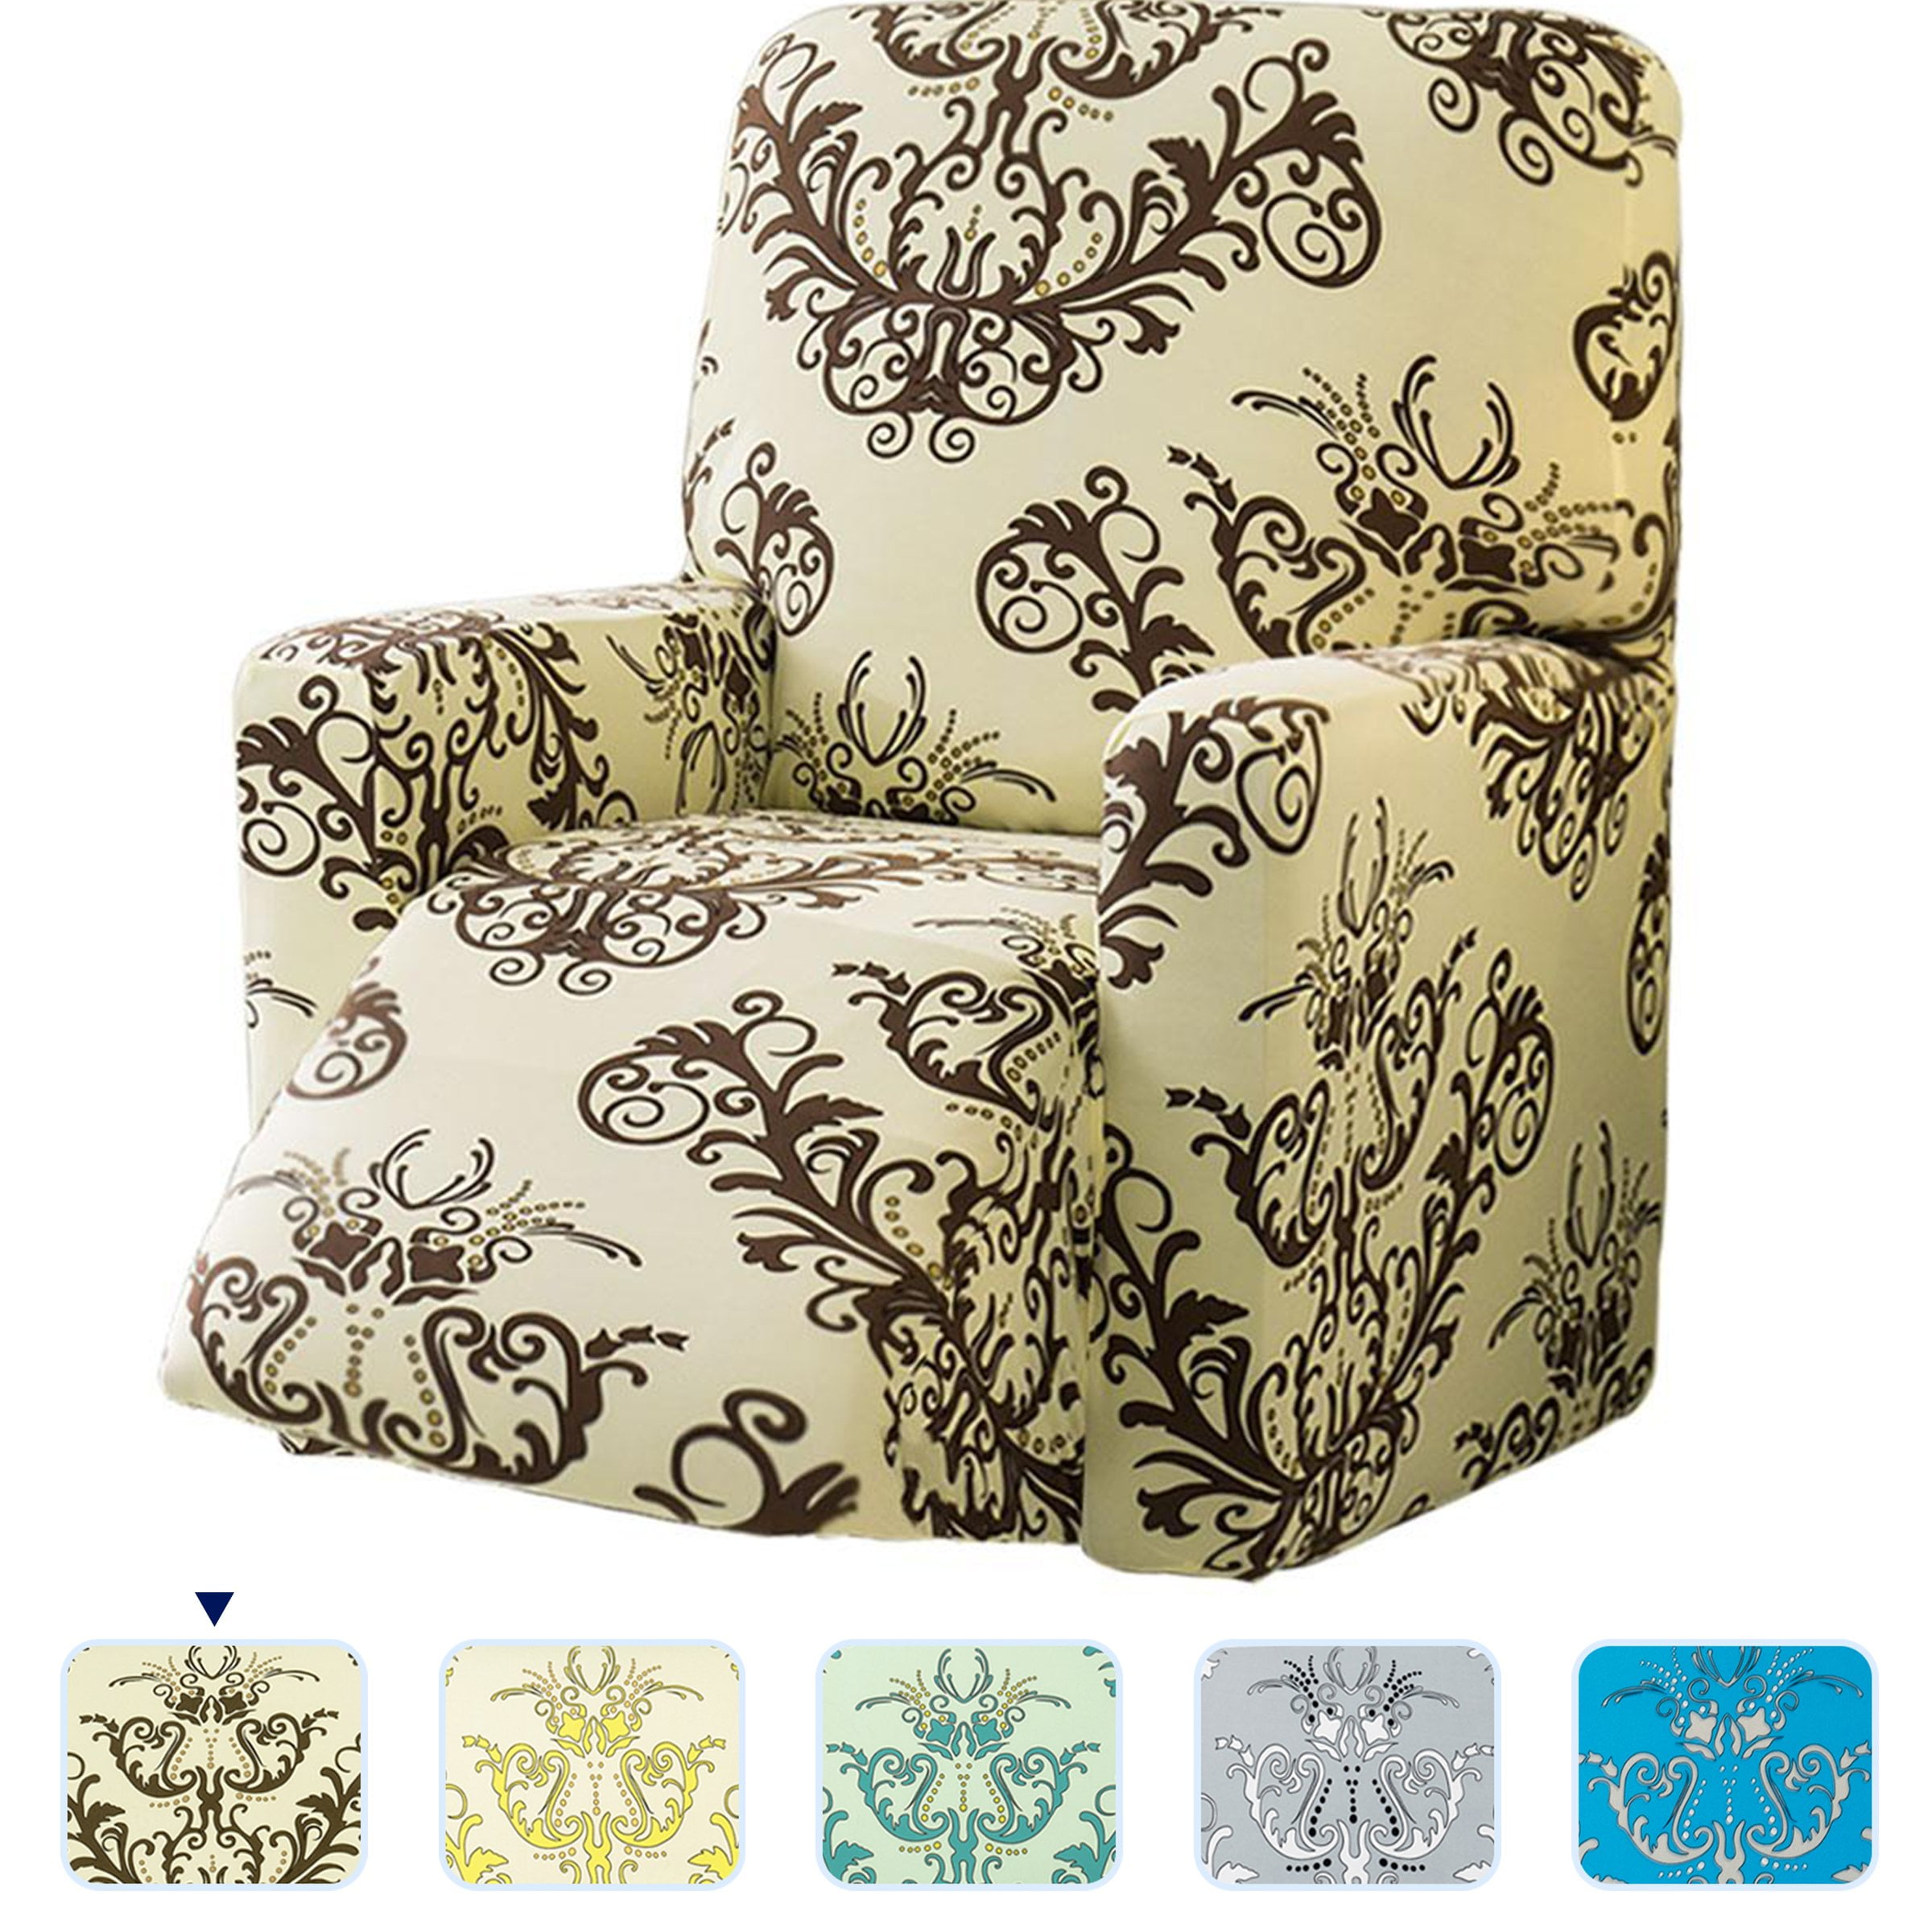 JERSEY "STRETCH" CHAIR COVER SLIPCOVER--LAZY BOY--AQUA-IN 10 SOLIDS & 3 PRINTS 